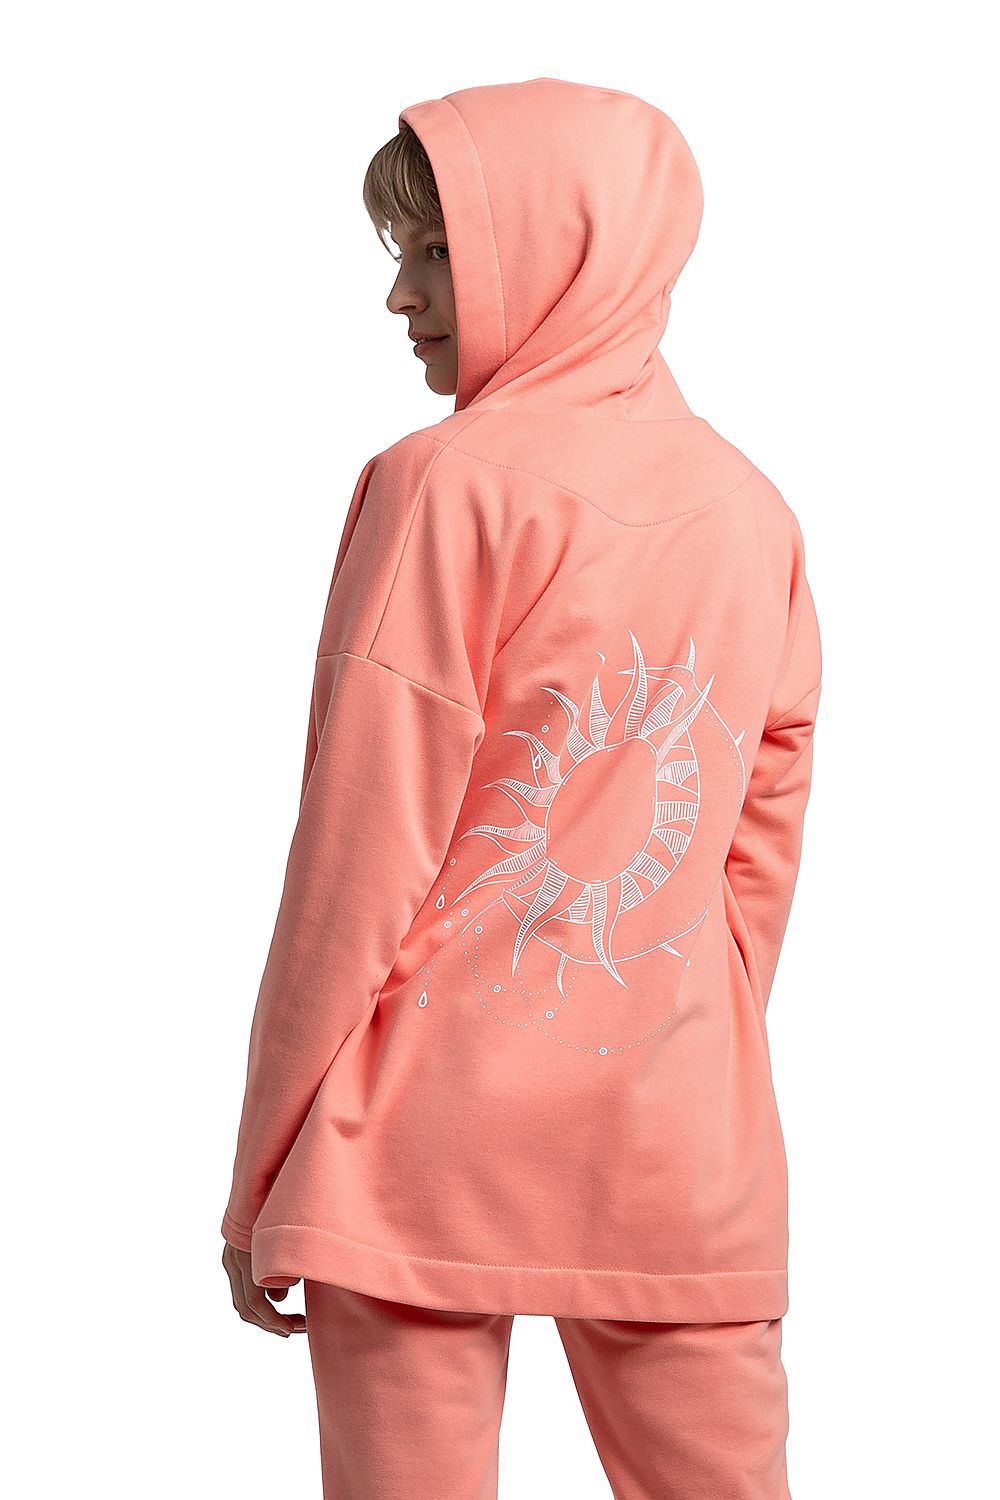 Hooded Sweatshirt LaLupa with Print in Pink